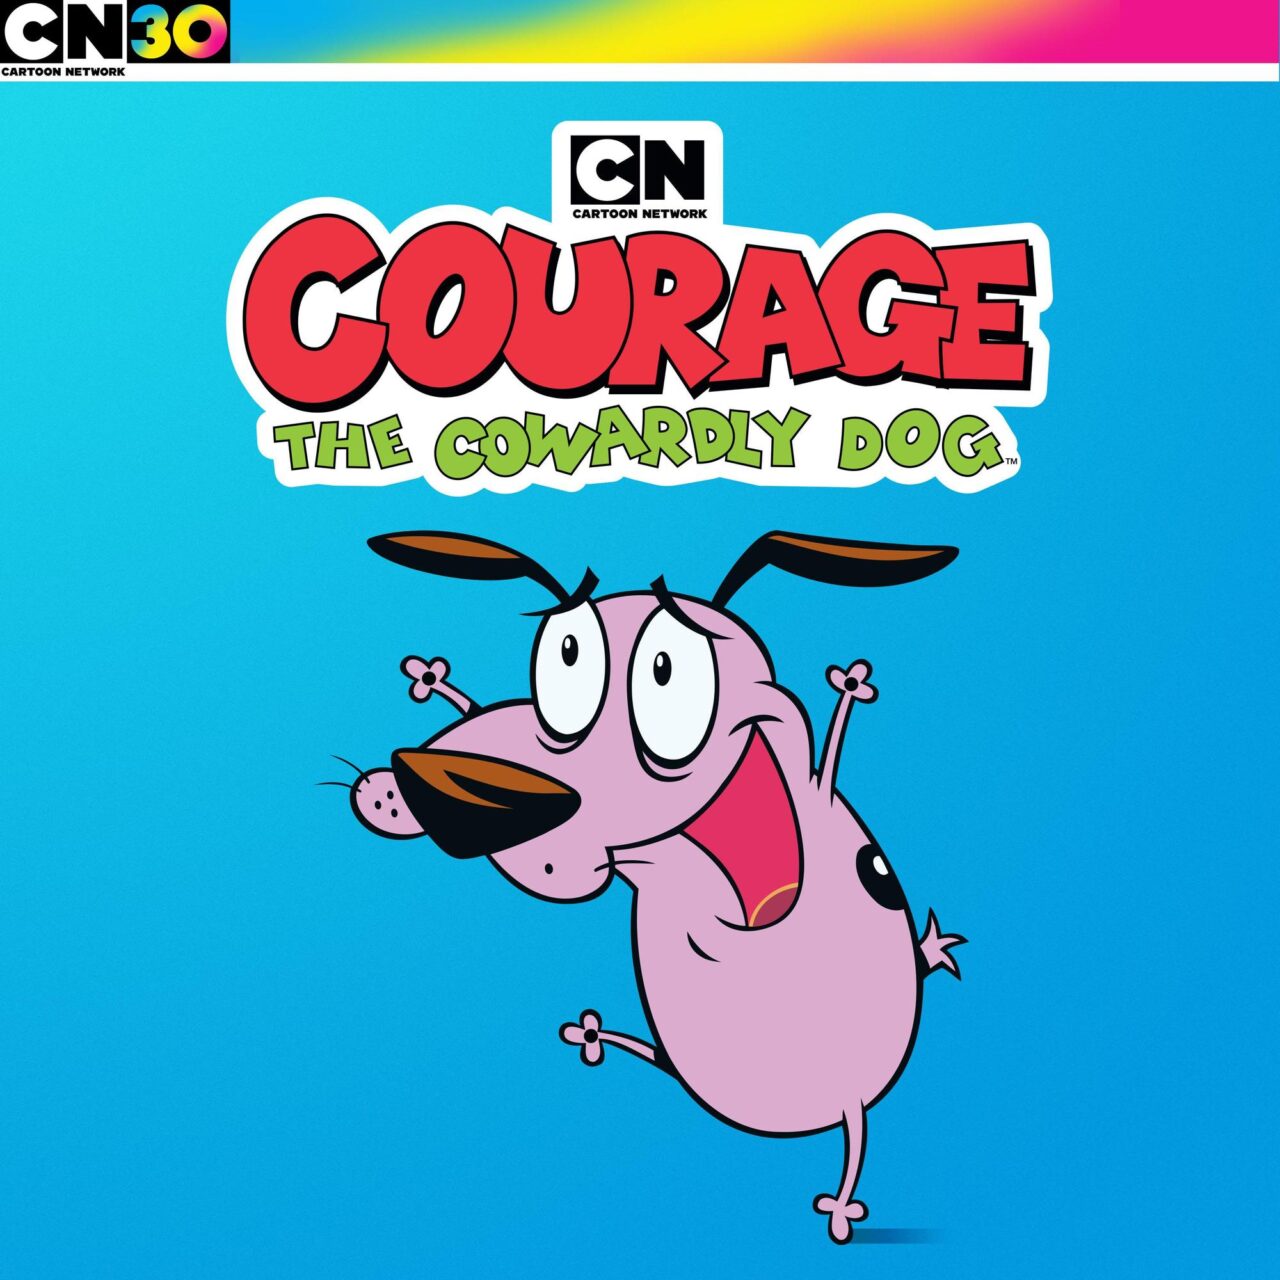 Courage the Cowardly Dog: The Complete Series (Cartoon Network/Warner Bros. Home Entertainment)